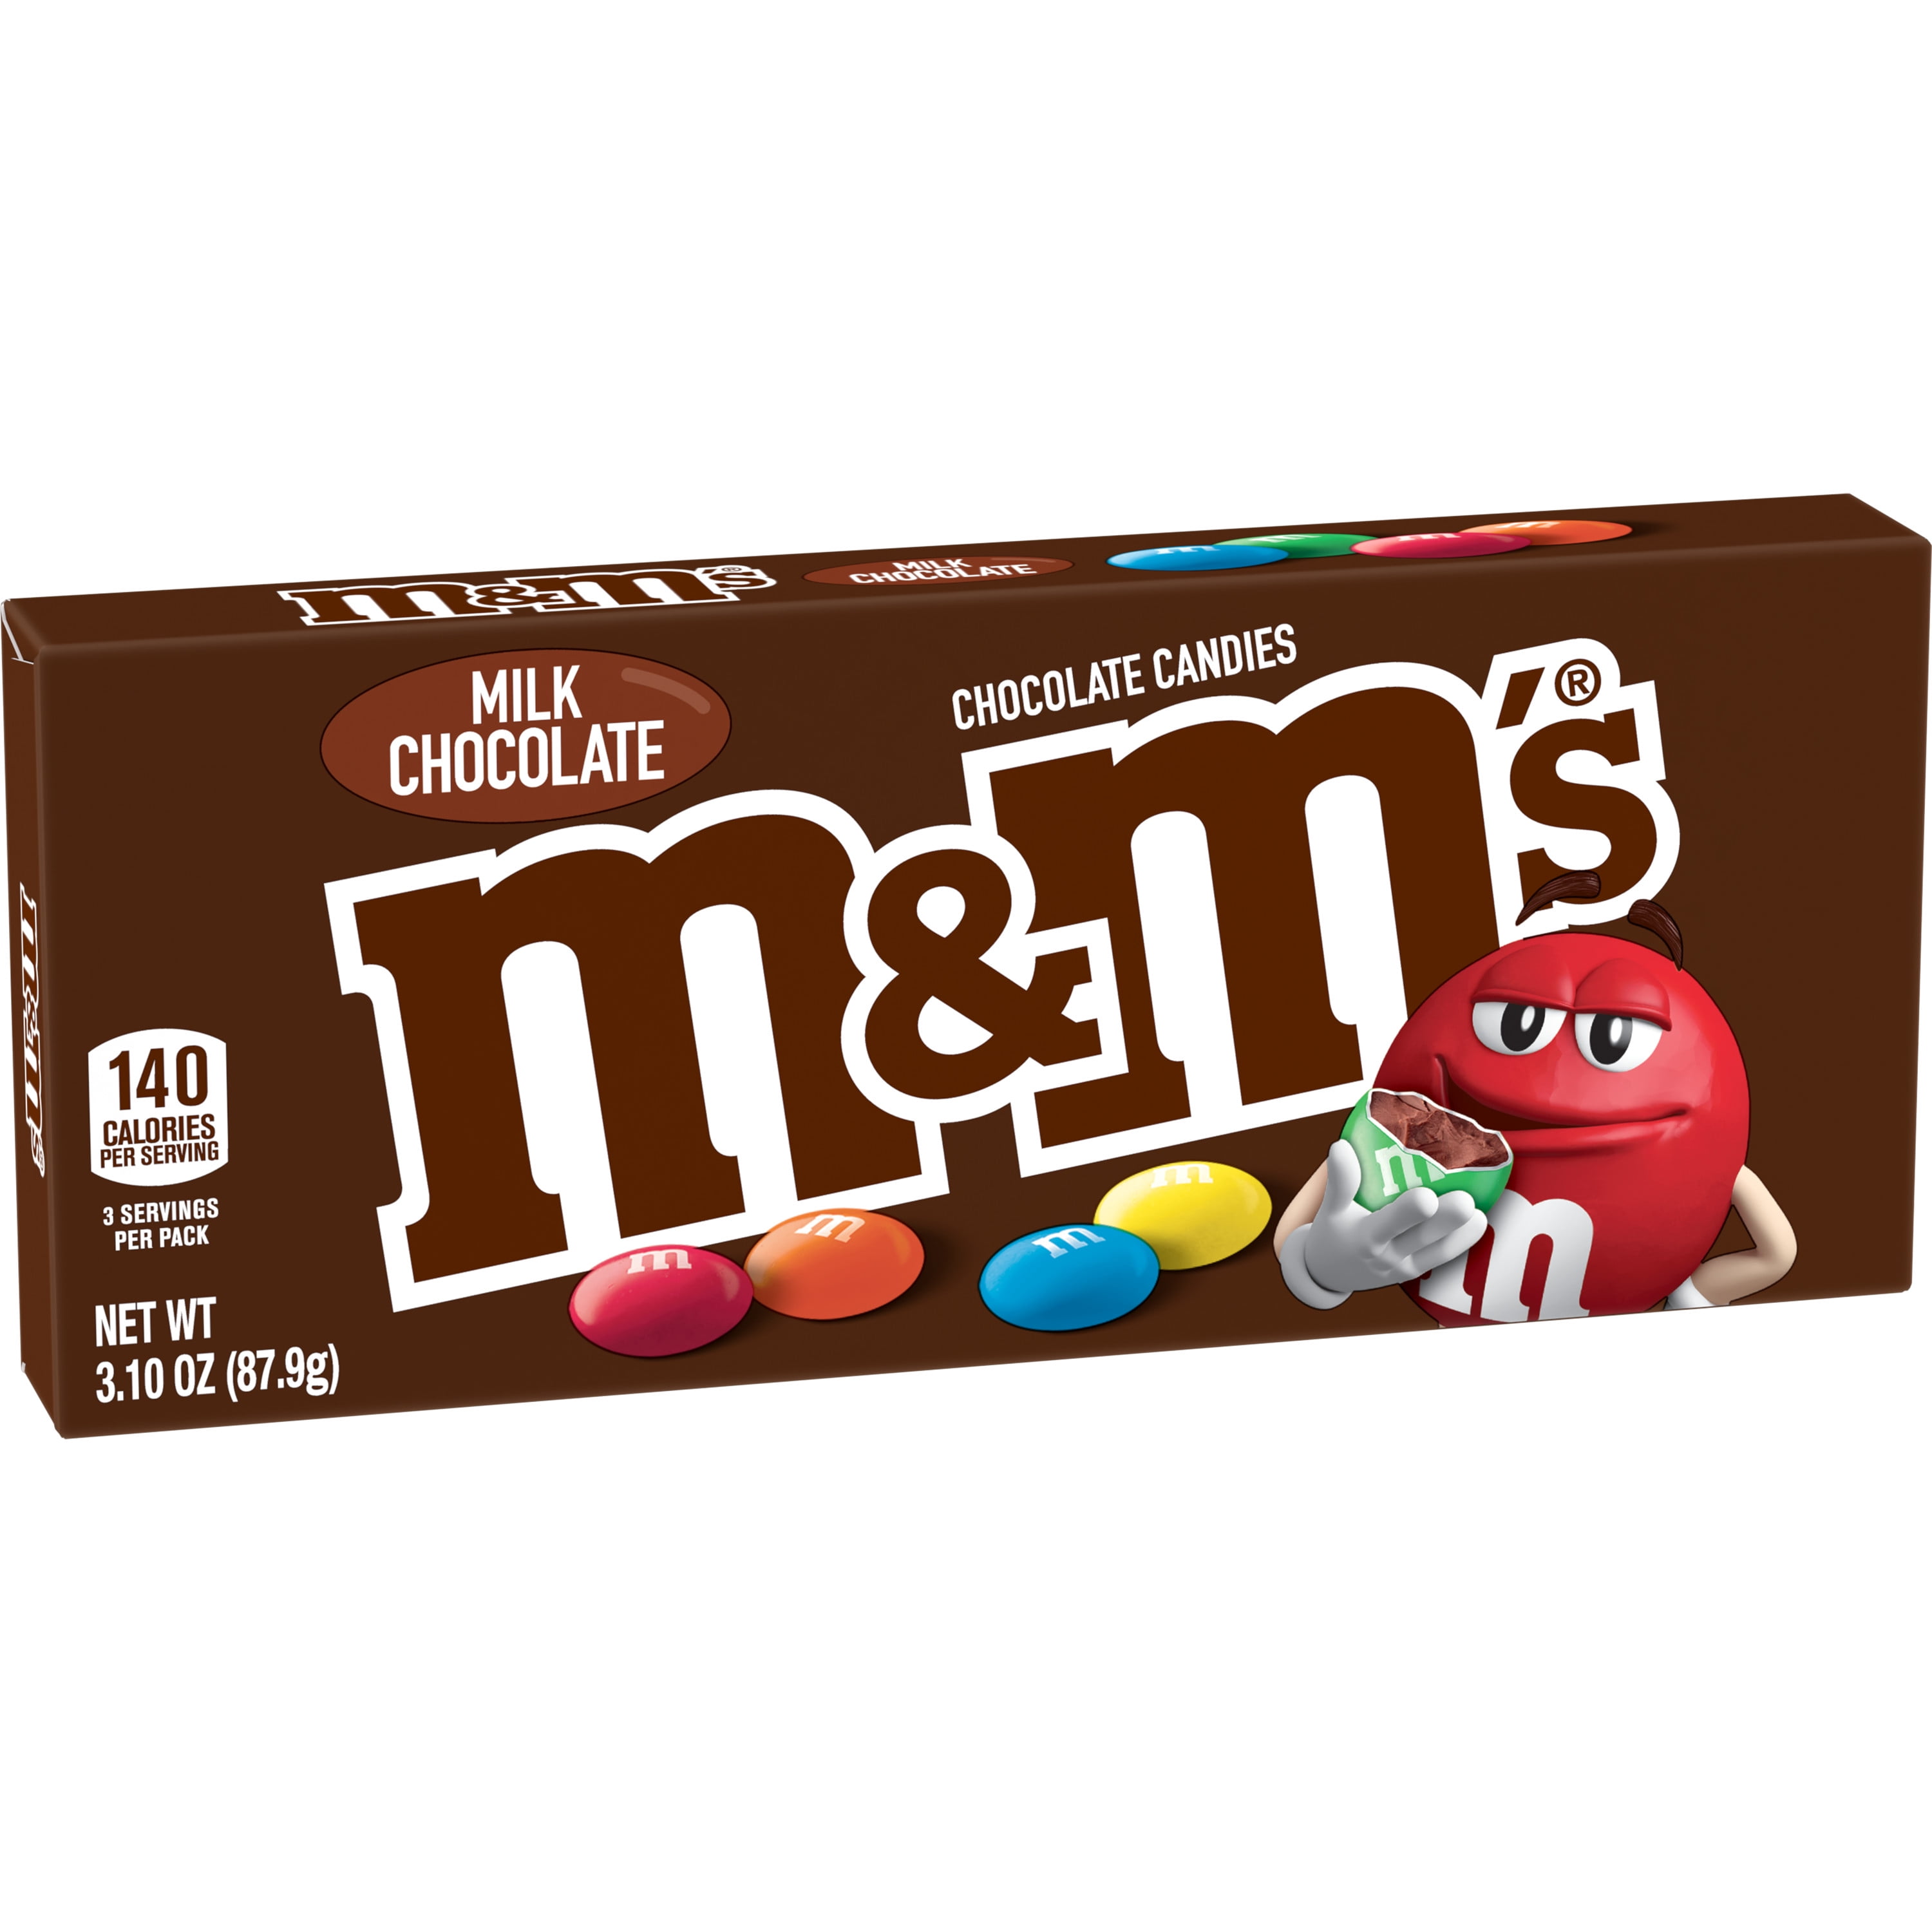 M&M Red Character Ceramic Mug Gift Set With Milk Chocolates Candies 2.75 Ounces 